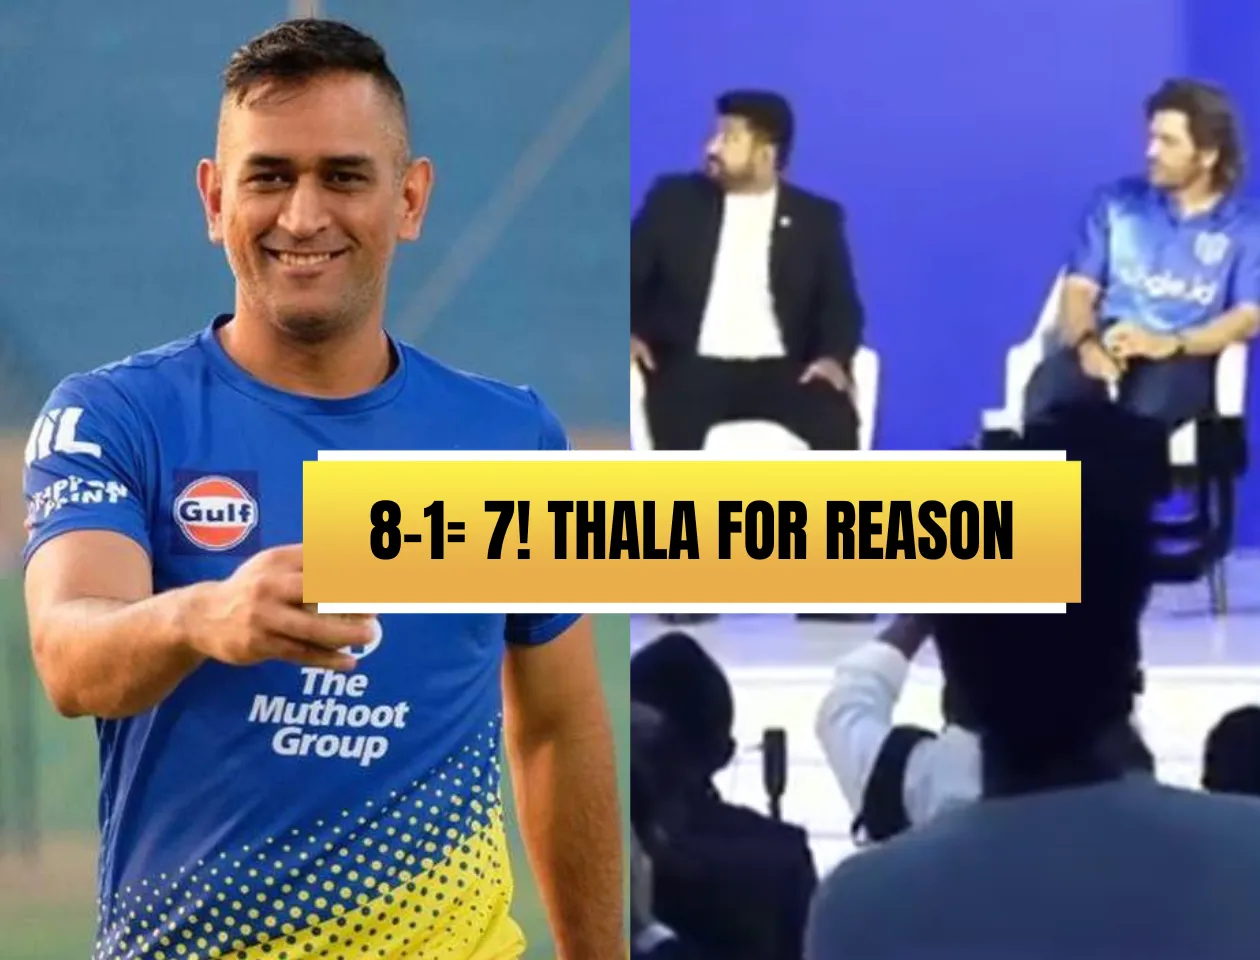 MS Dhoni during a promotional event (right) (Source: X)